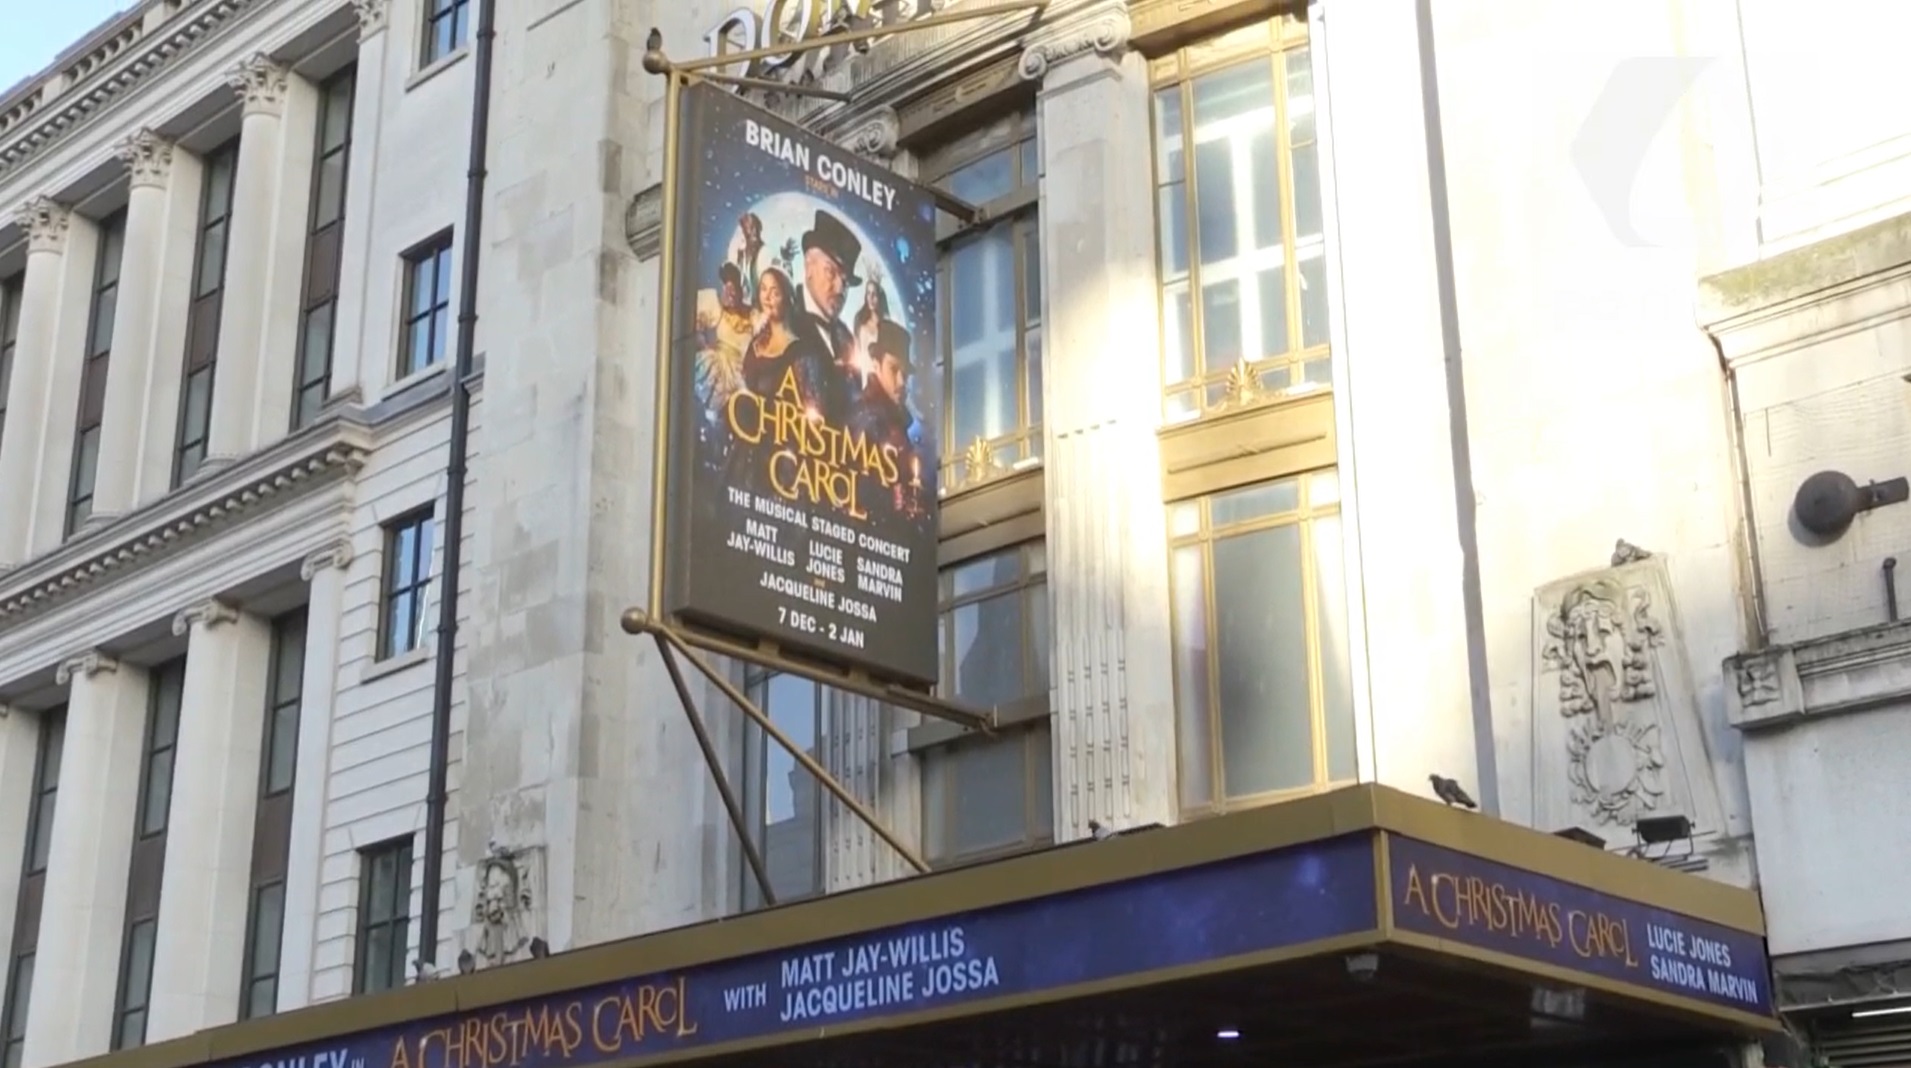 The Dominion Theatre in London's West End